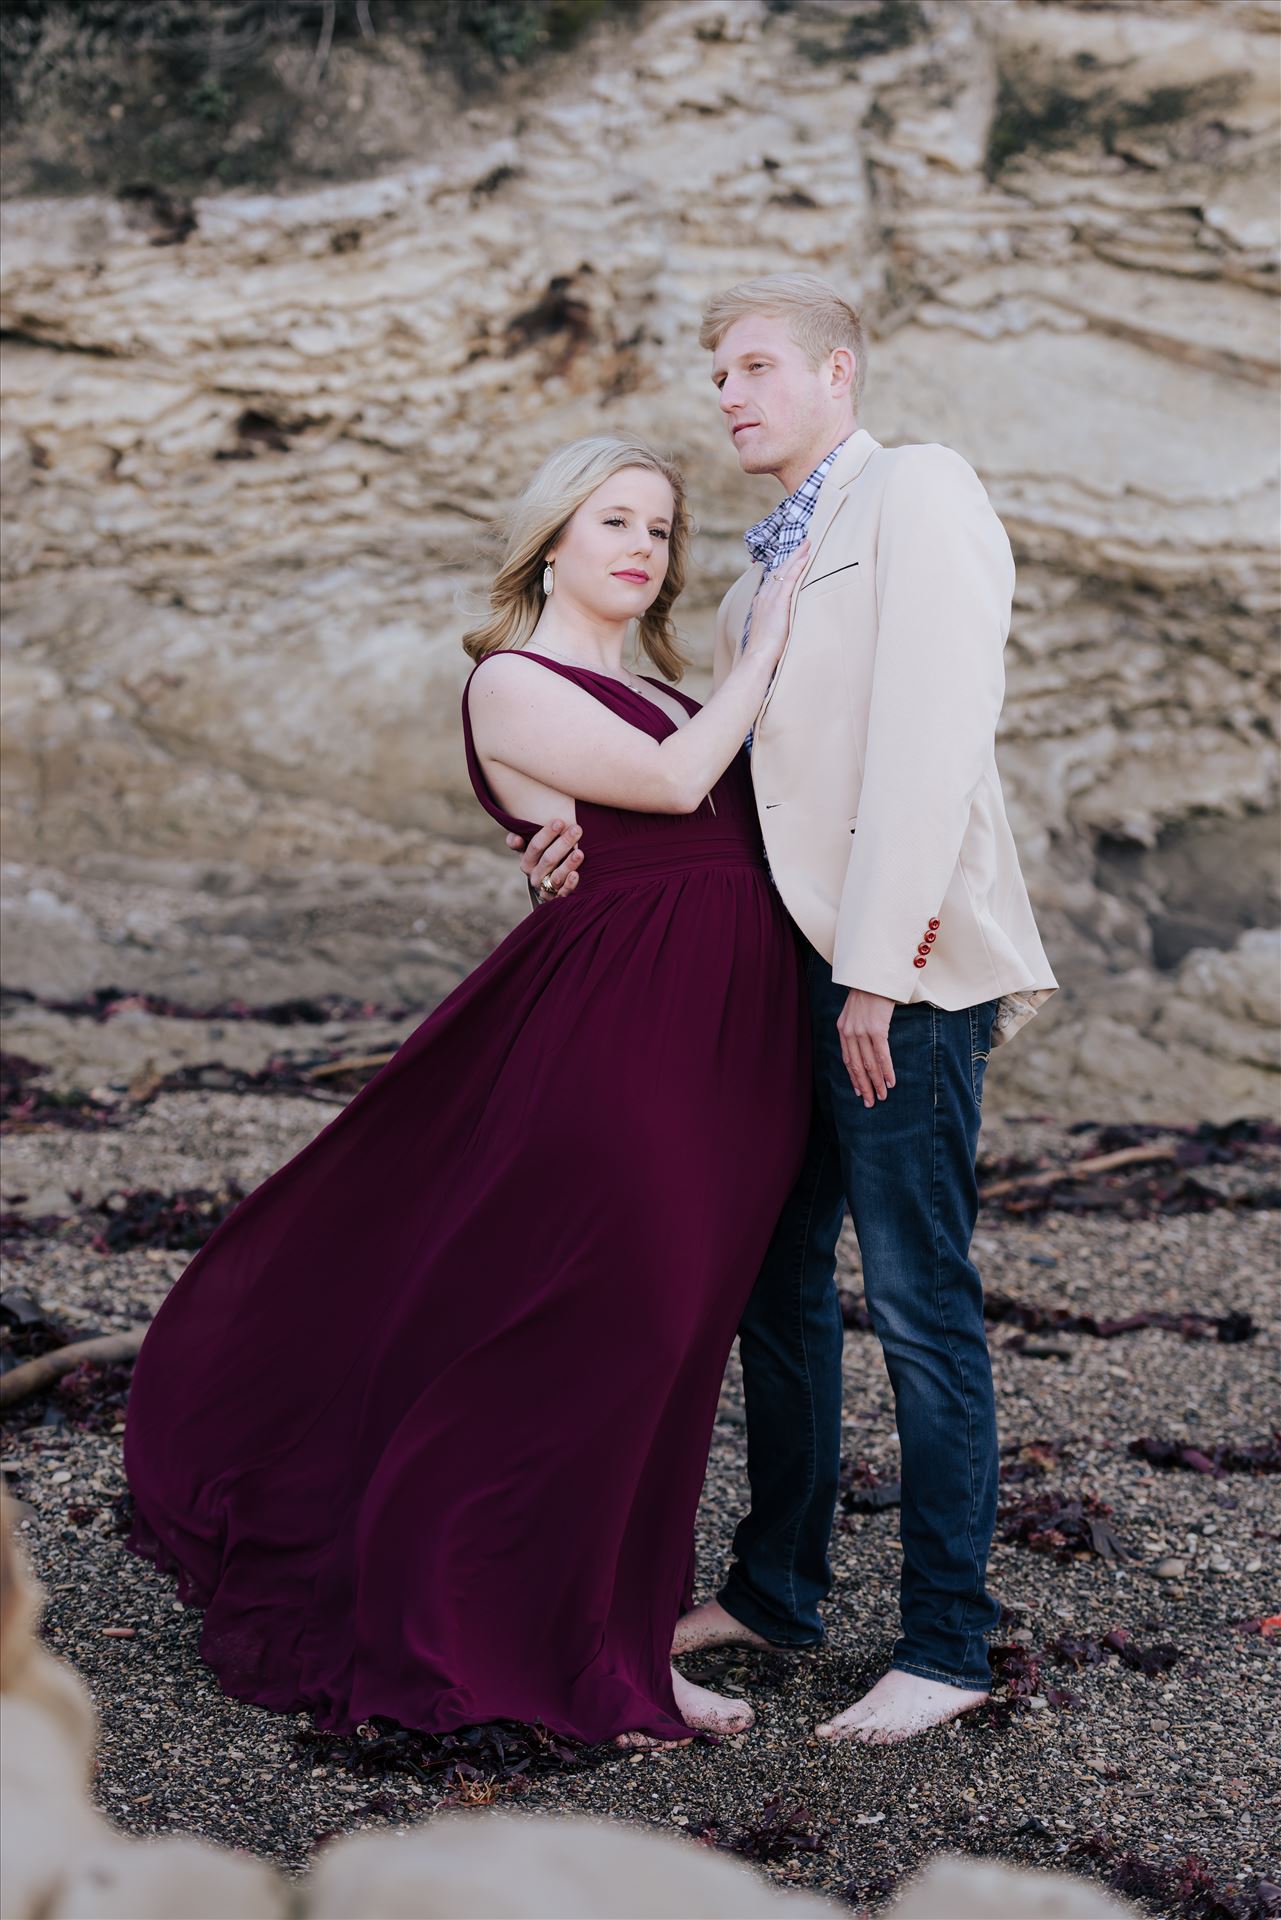 DSC_2301.JPG San Luis Obispo and Santa Barbara County Wedding and Engagement Photography. Mirror's Edge Photography captures Montana de Oro Engagement Session.  Romantic couple on the beach in love. by Sarah Williams